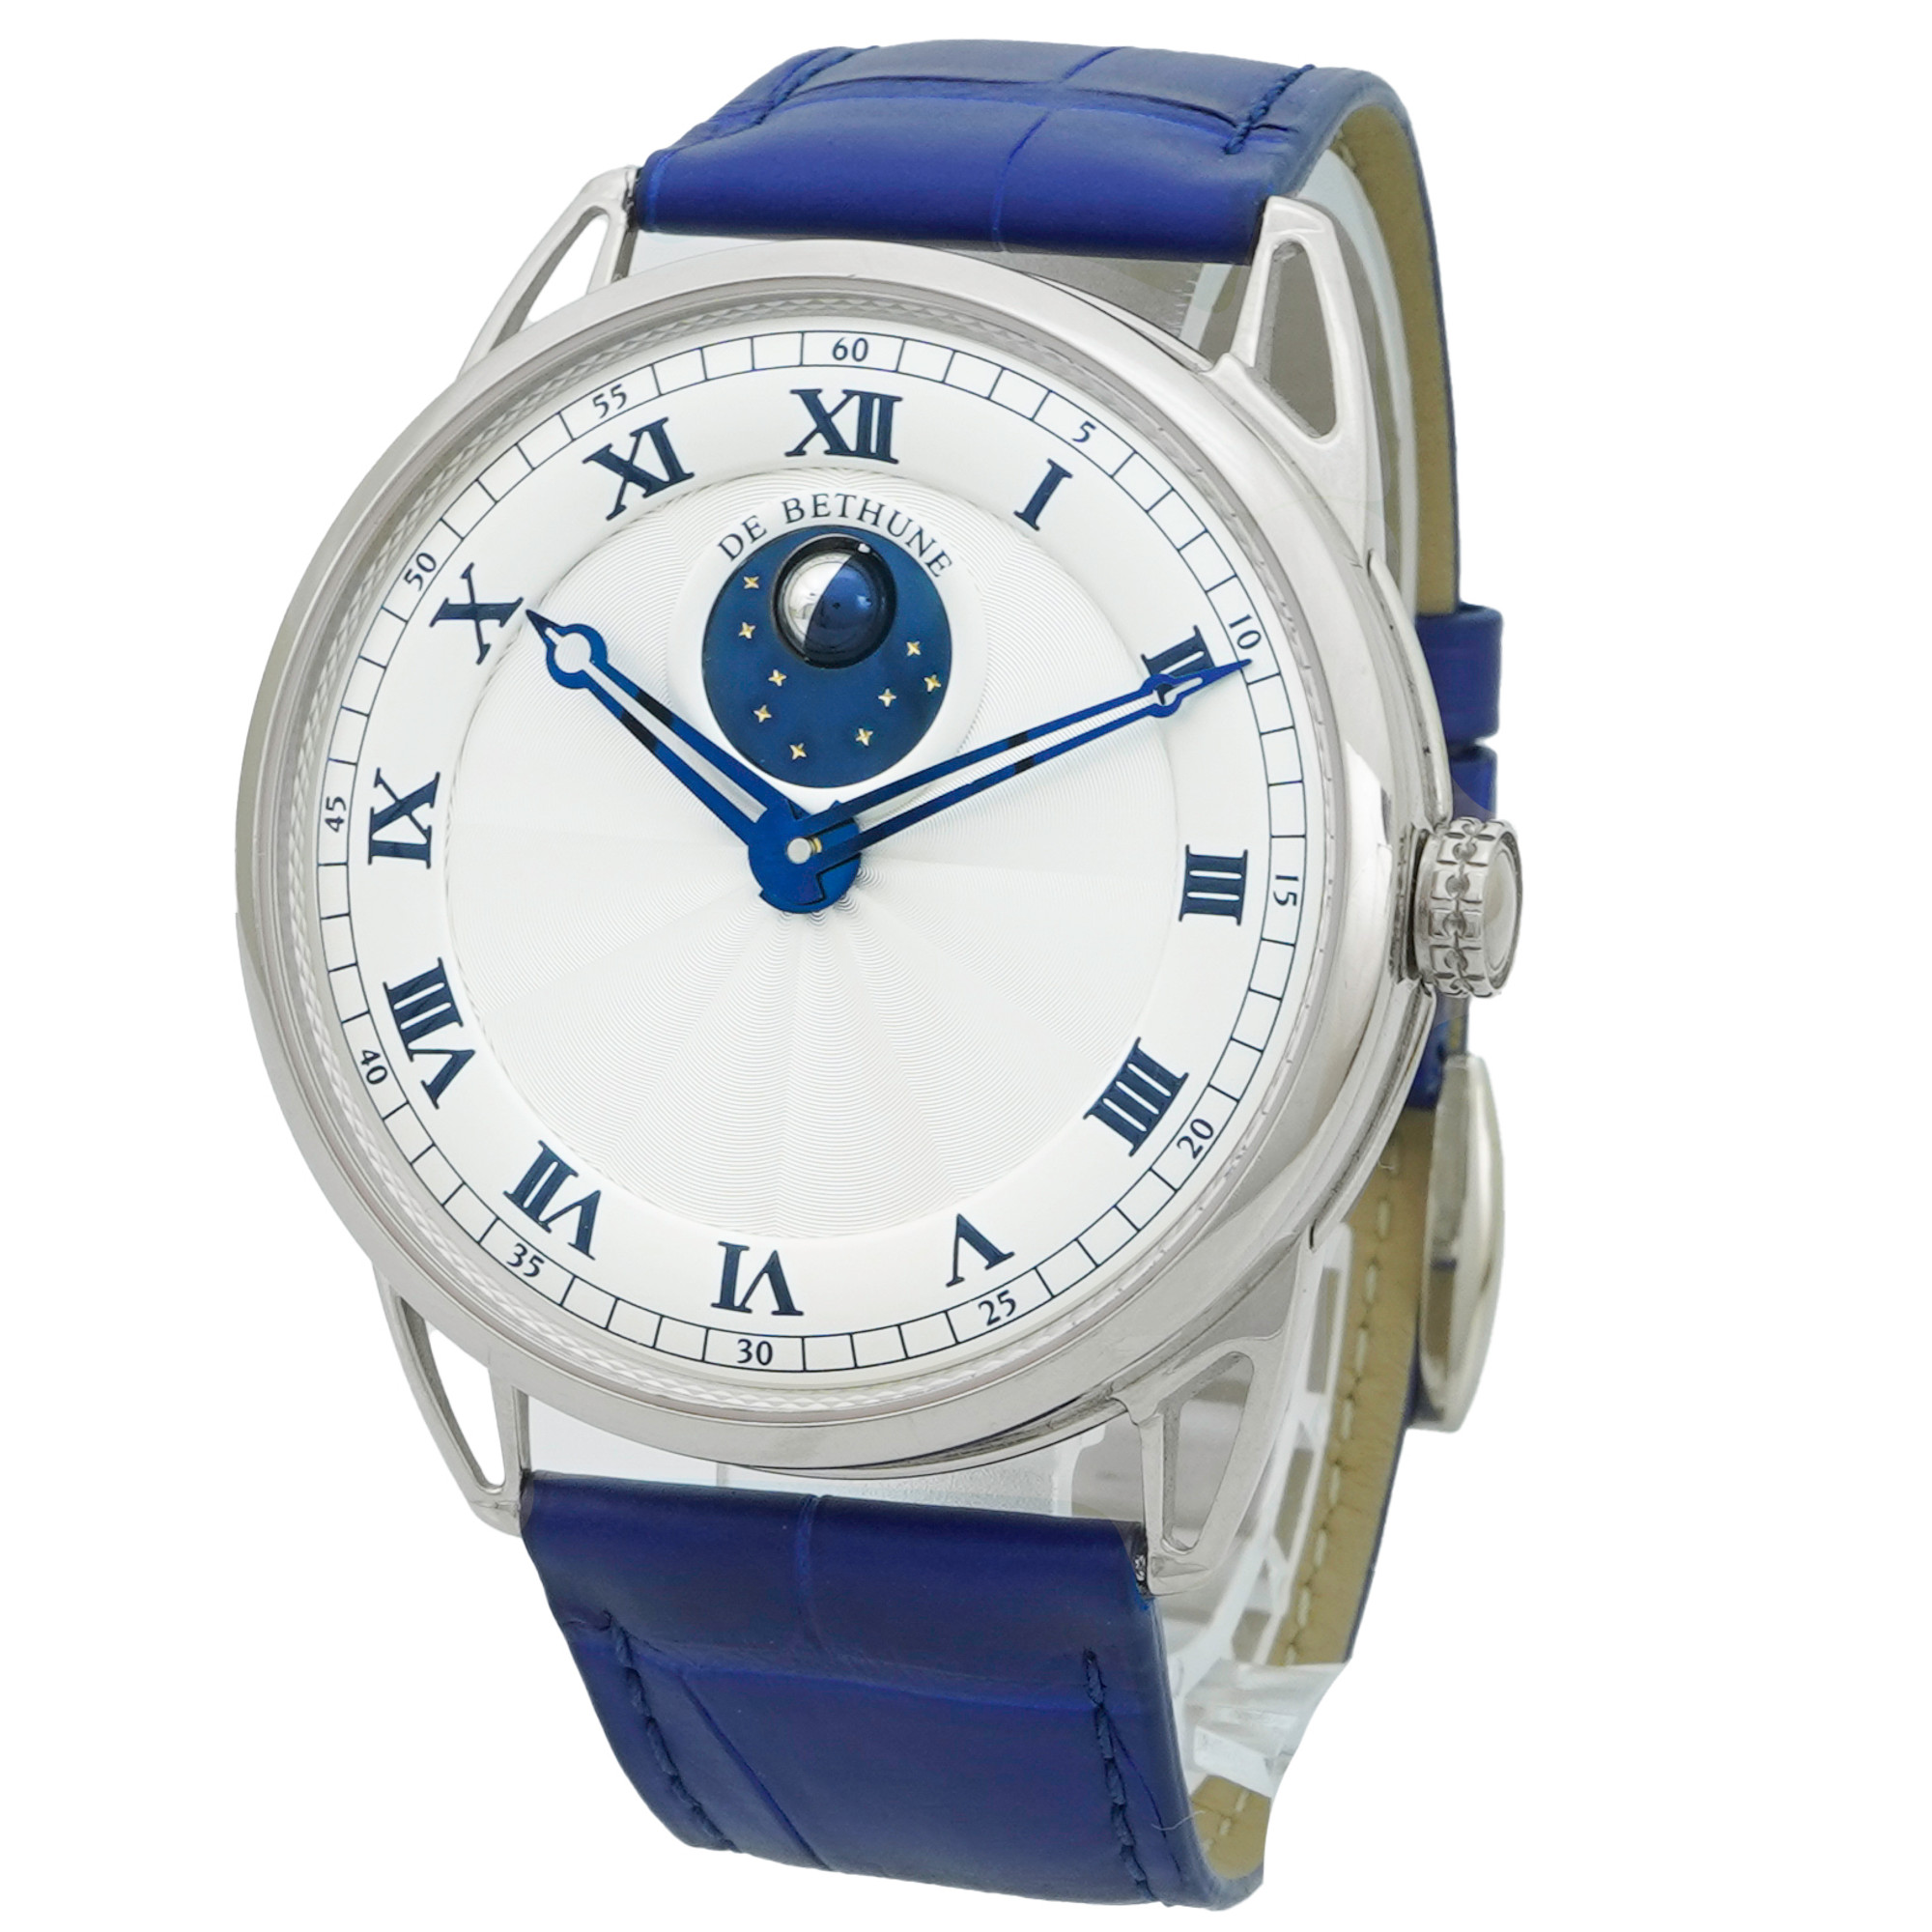 De Bethune Ball Moonphase DB25 White Gold - Inventory 4680